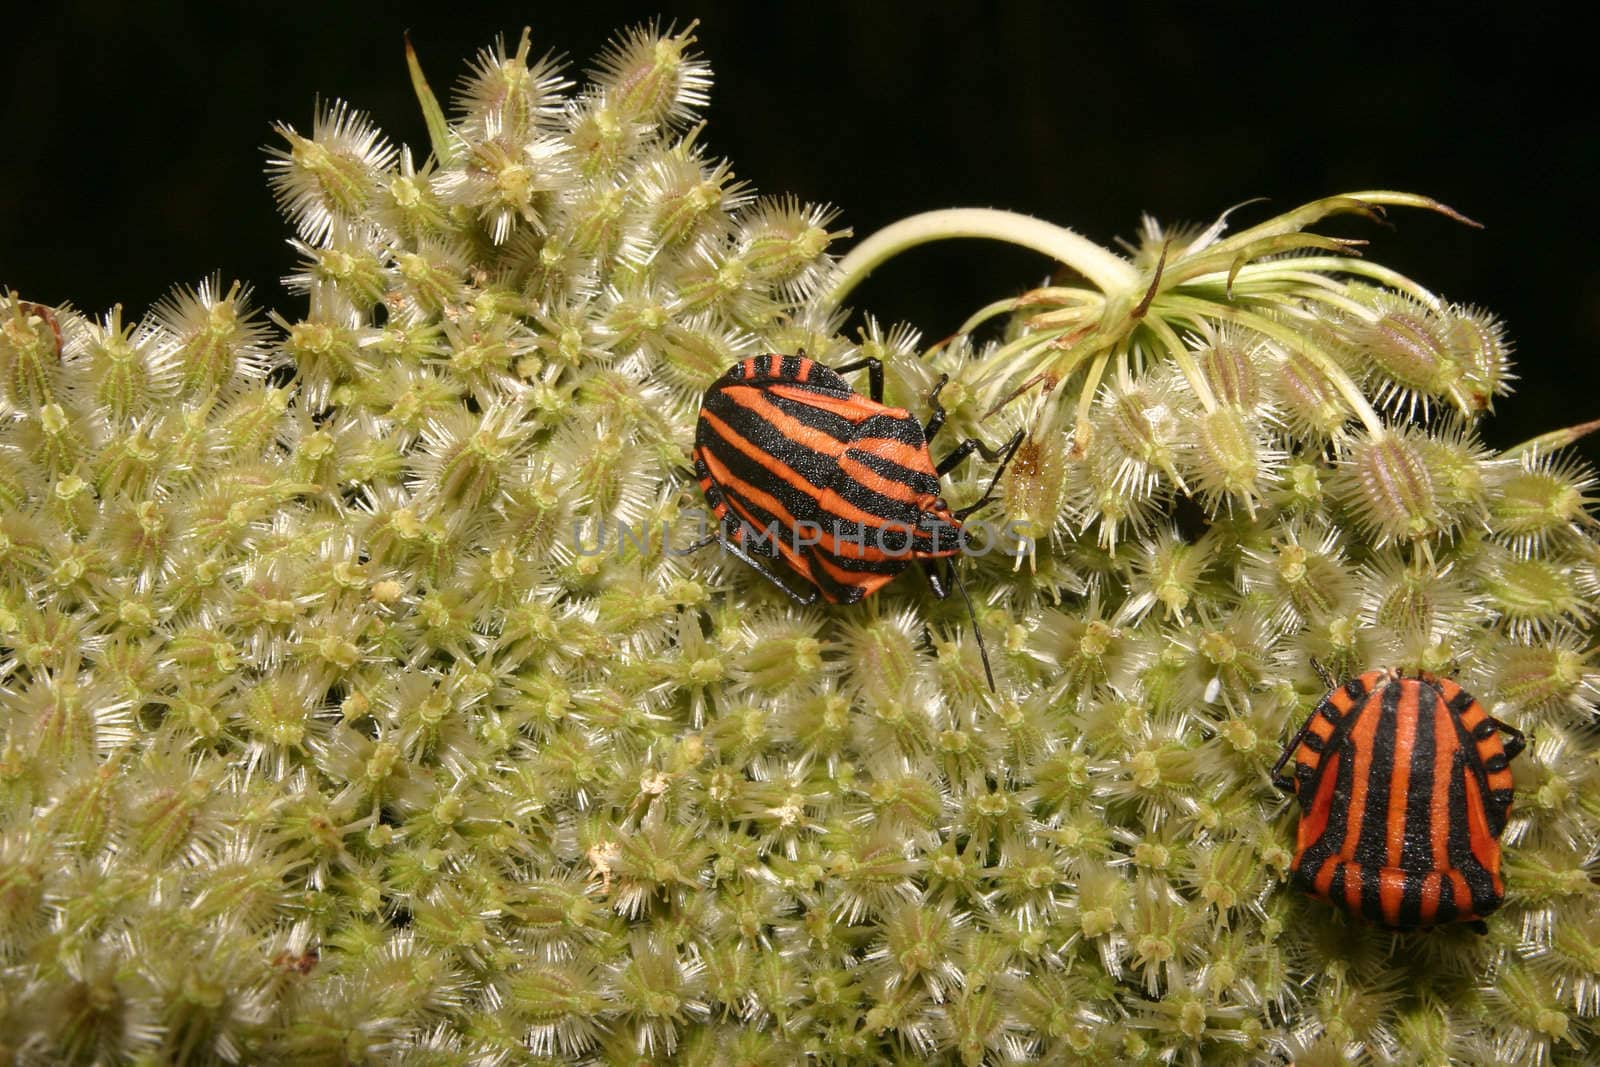 Strip bugs (Graphosoma lineatum) by tdietrich